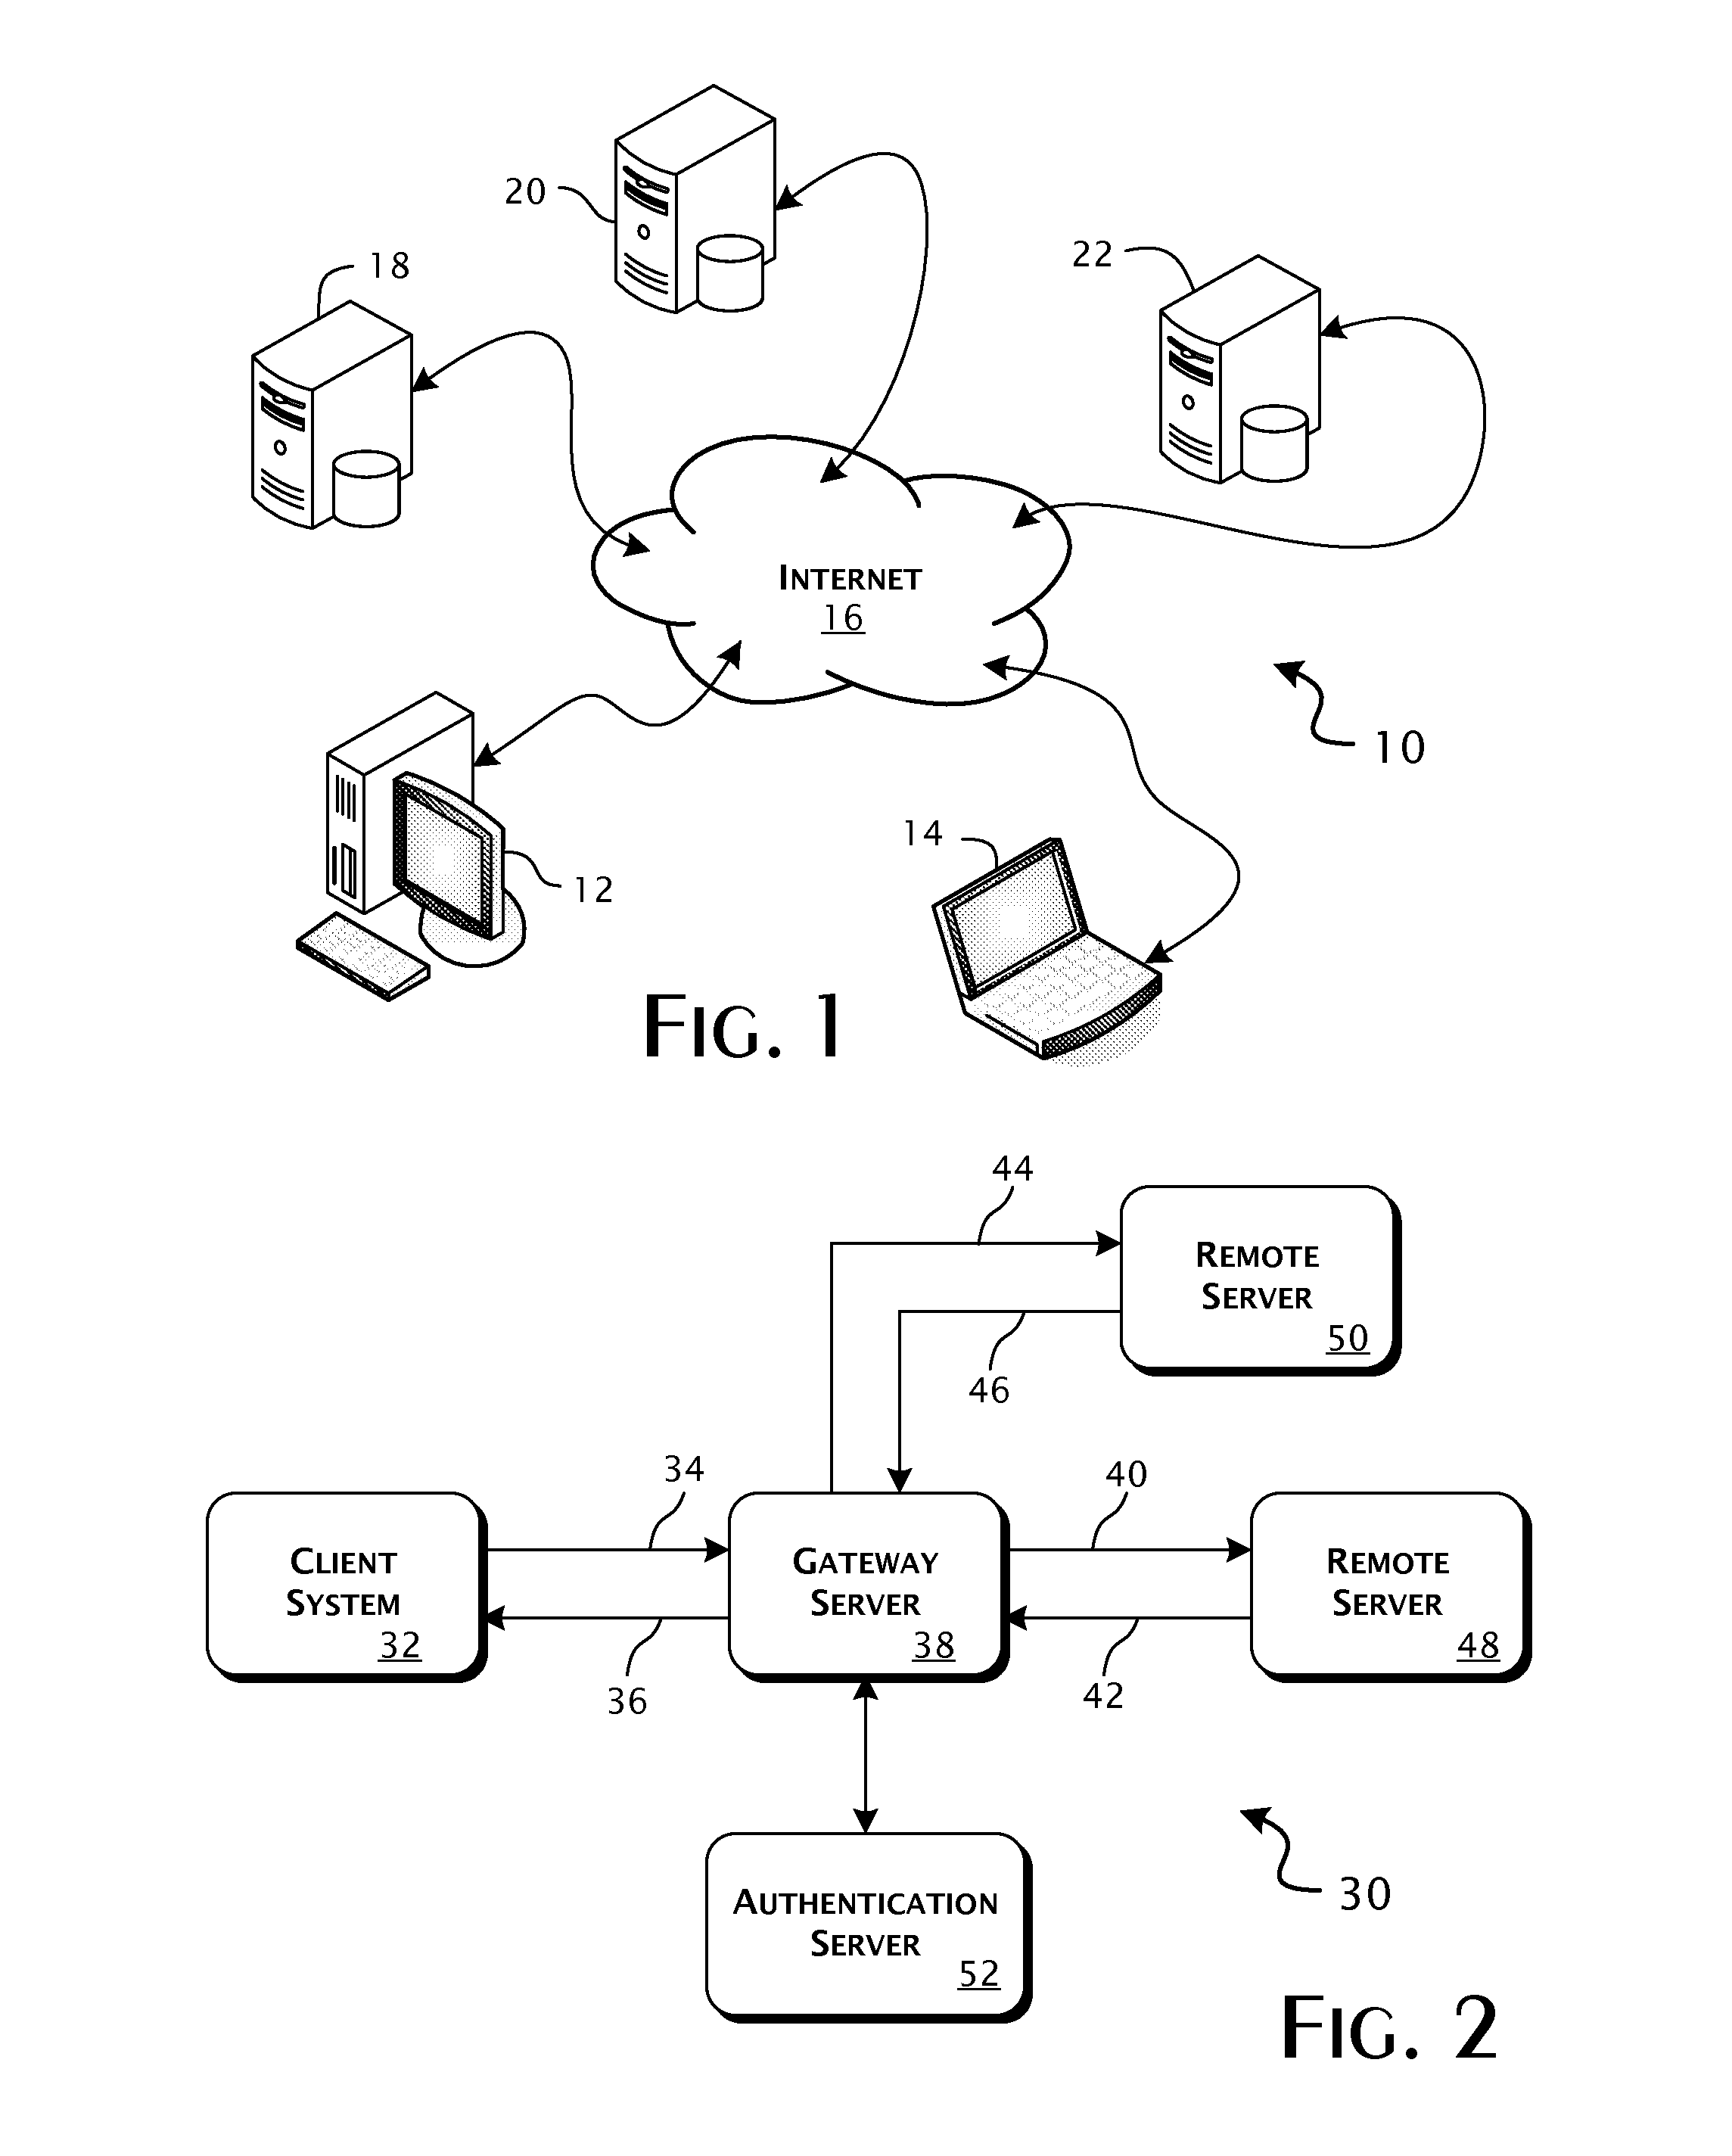 System and methods for providing stateless security management for web applications using non-HTTP communications protocols